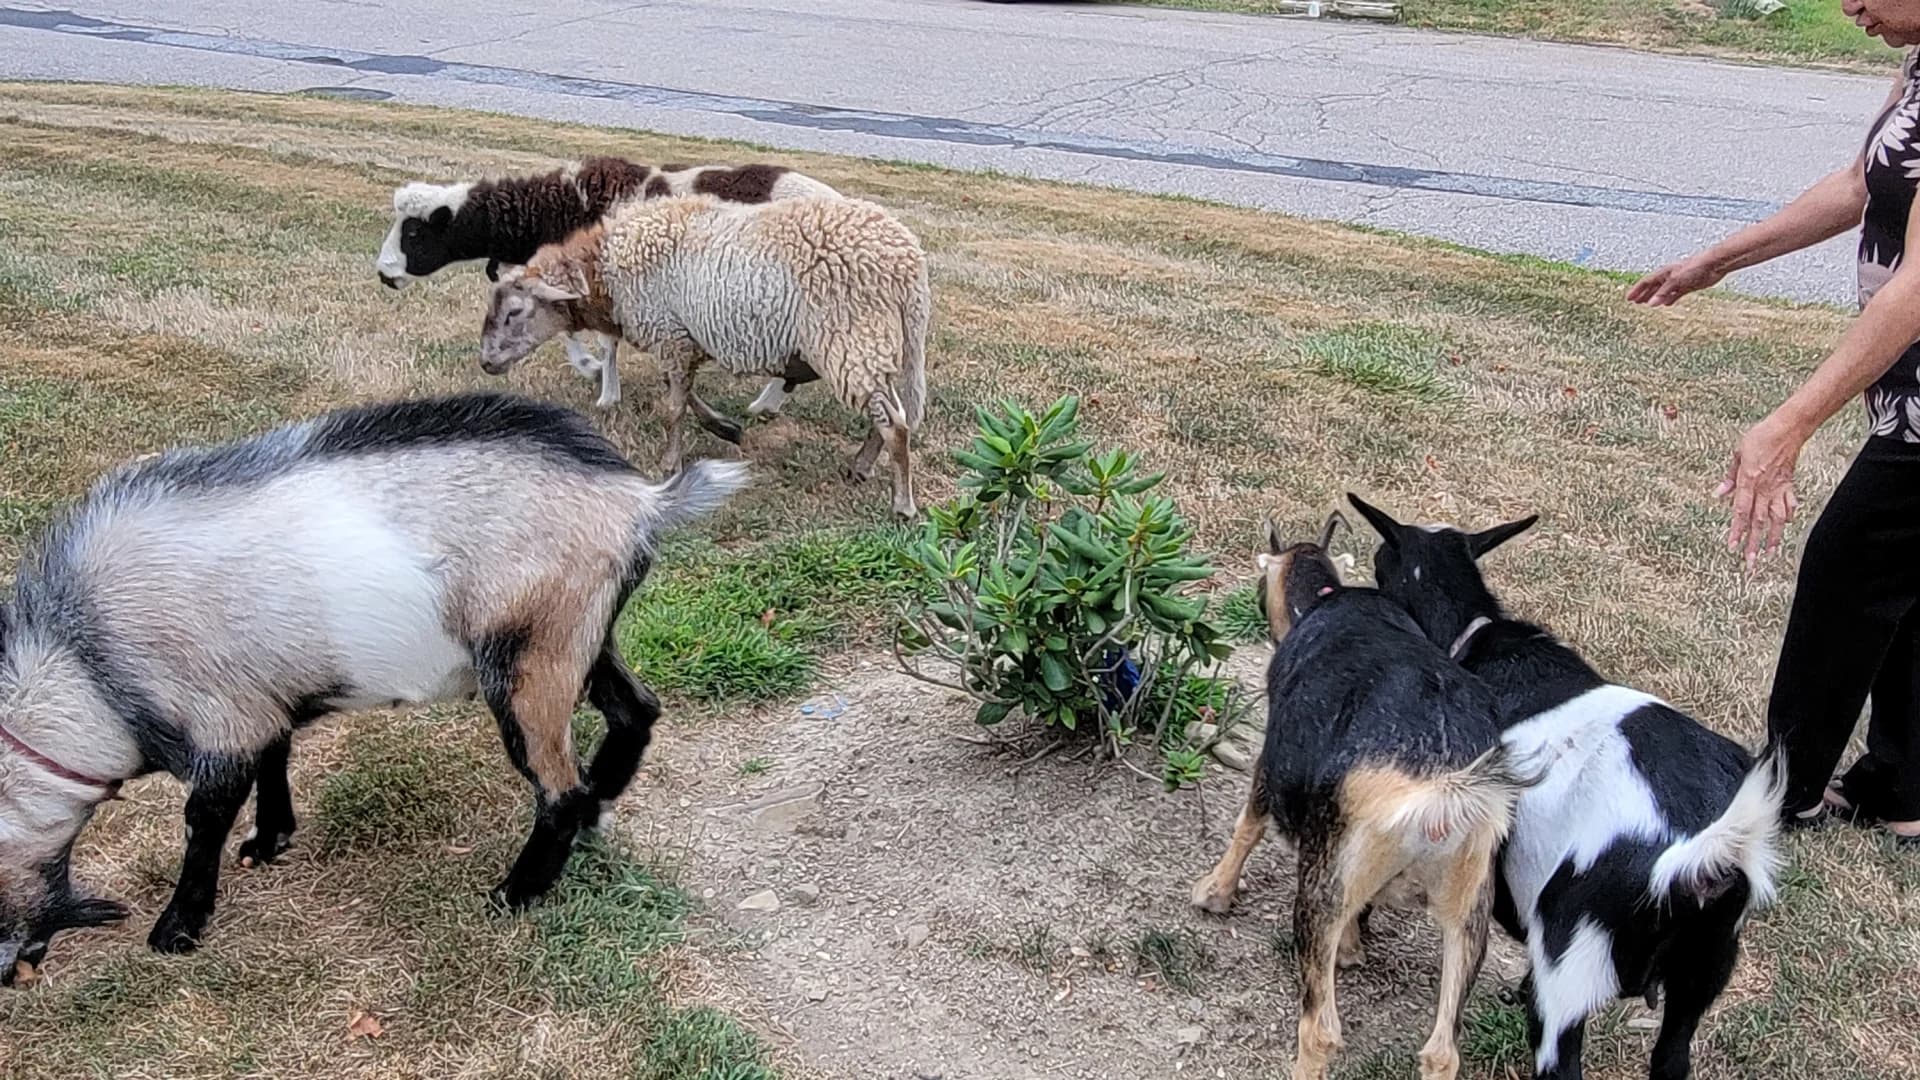 Goats on the loose in New Hempstead